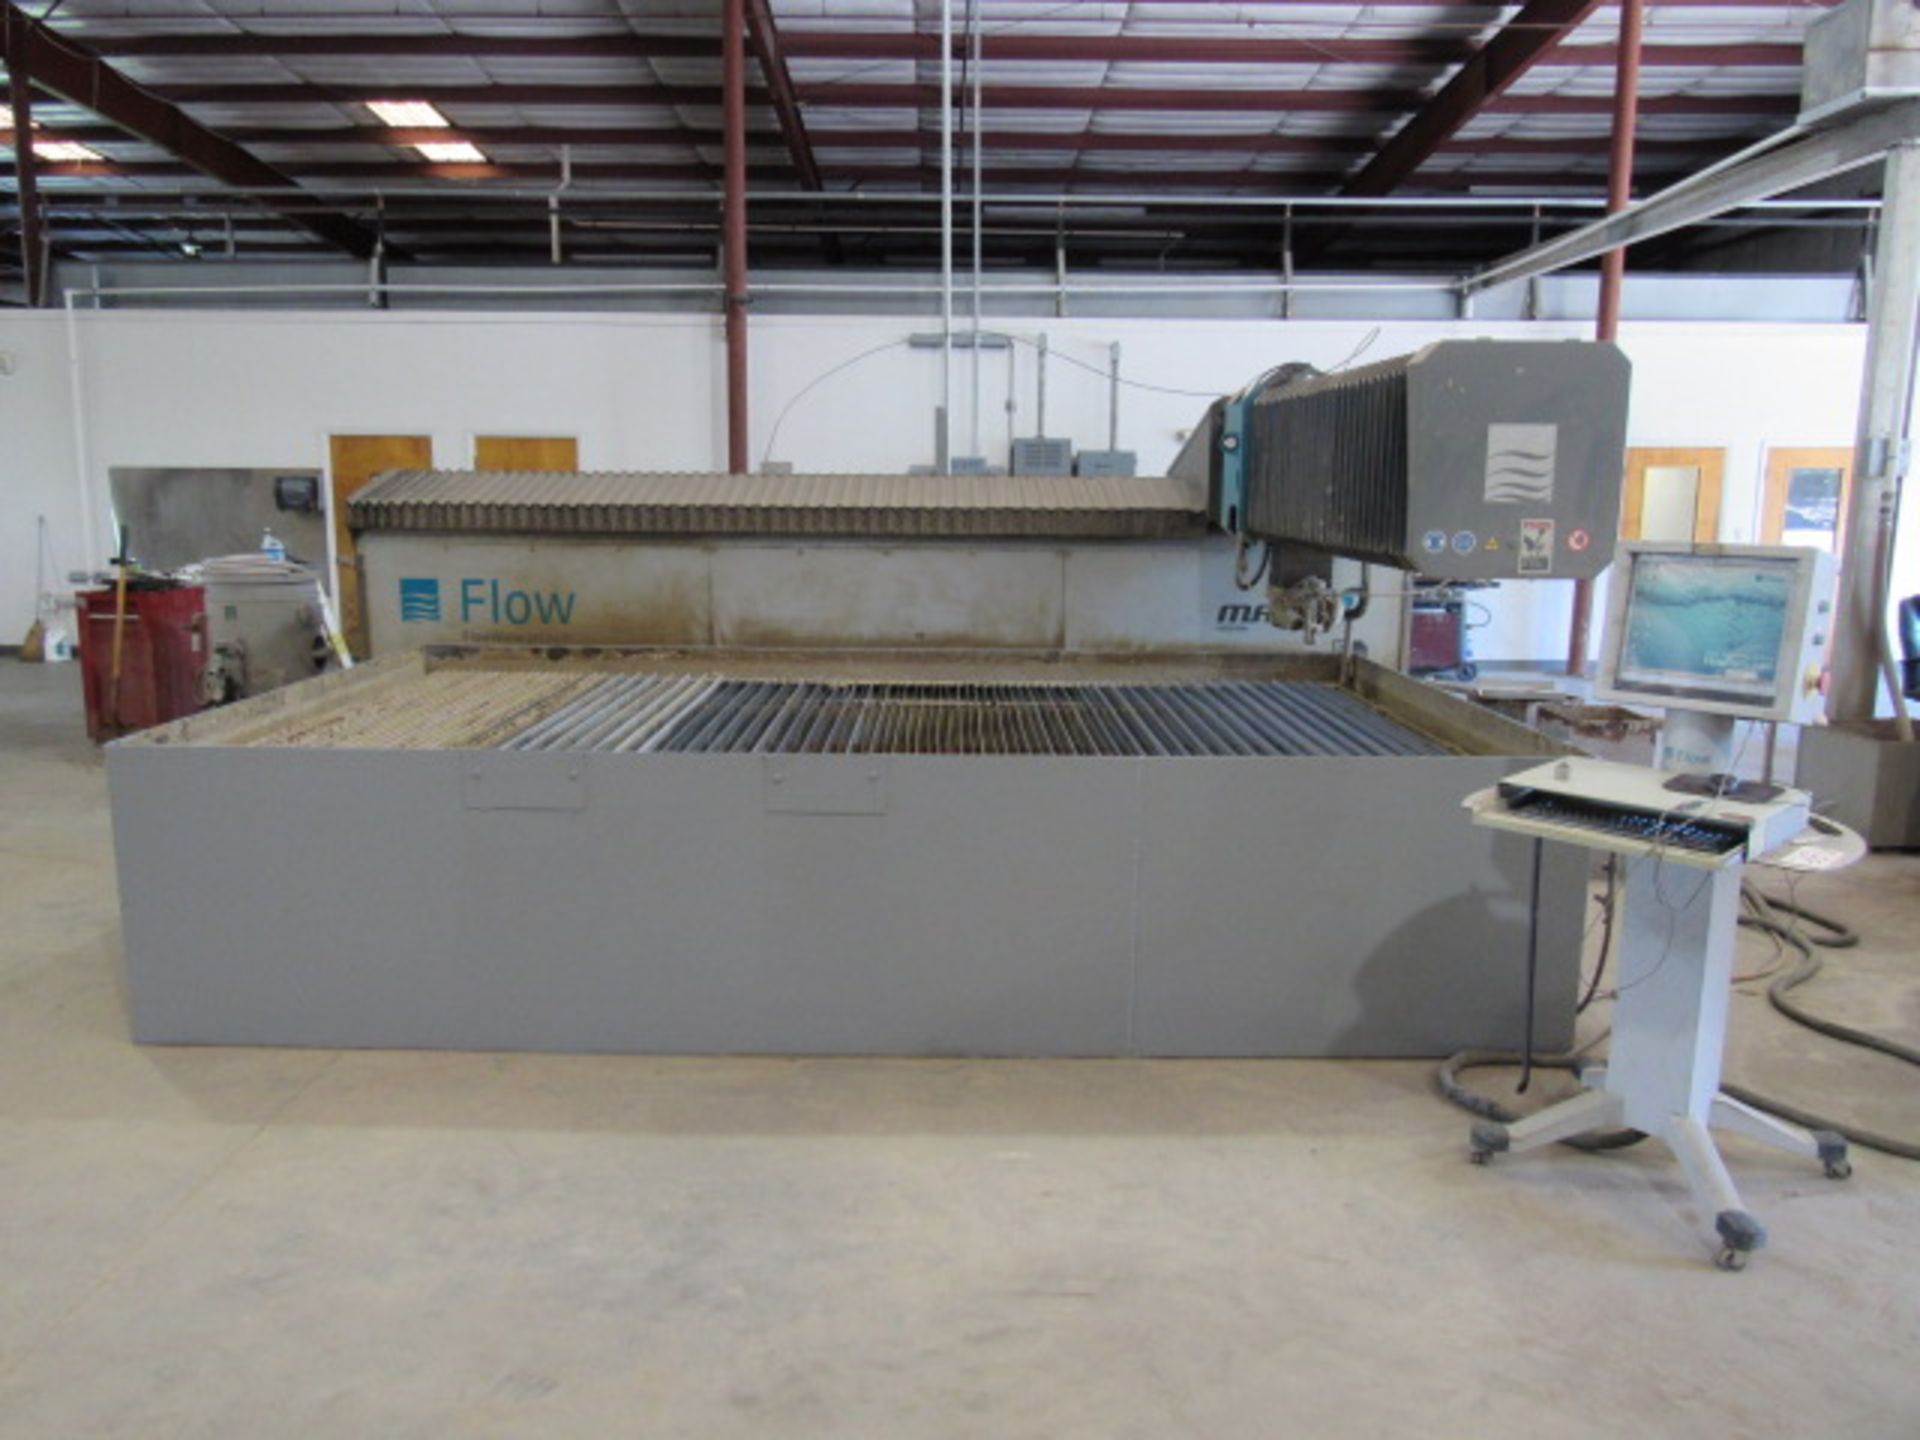 Flow Mach3 4020B 60,000 PSI 3-Axis CNC Water Jet - Image 3 of 10